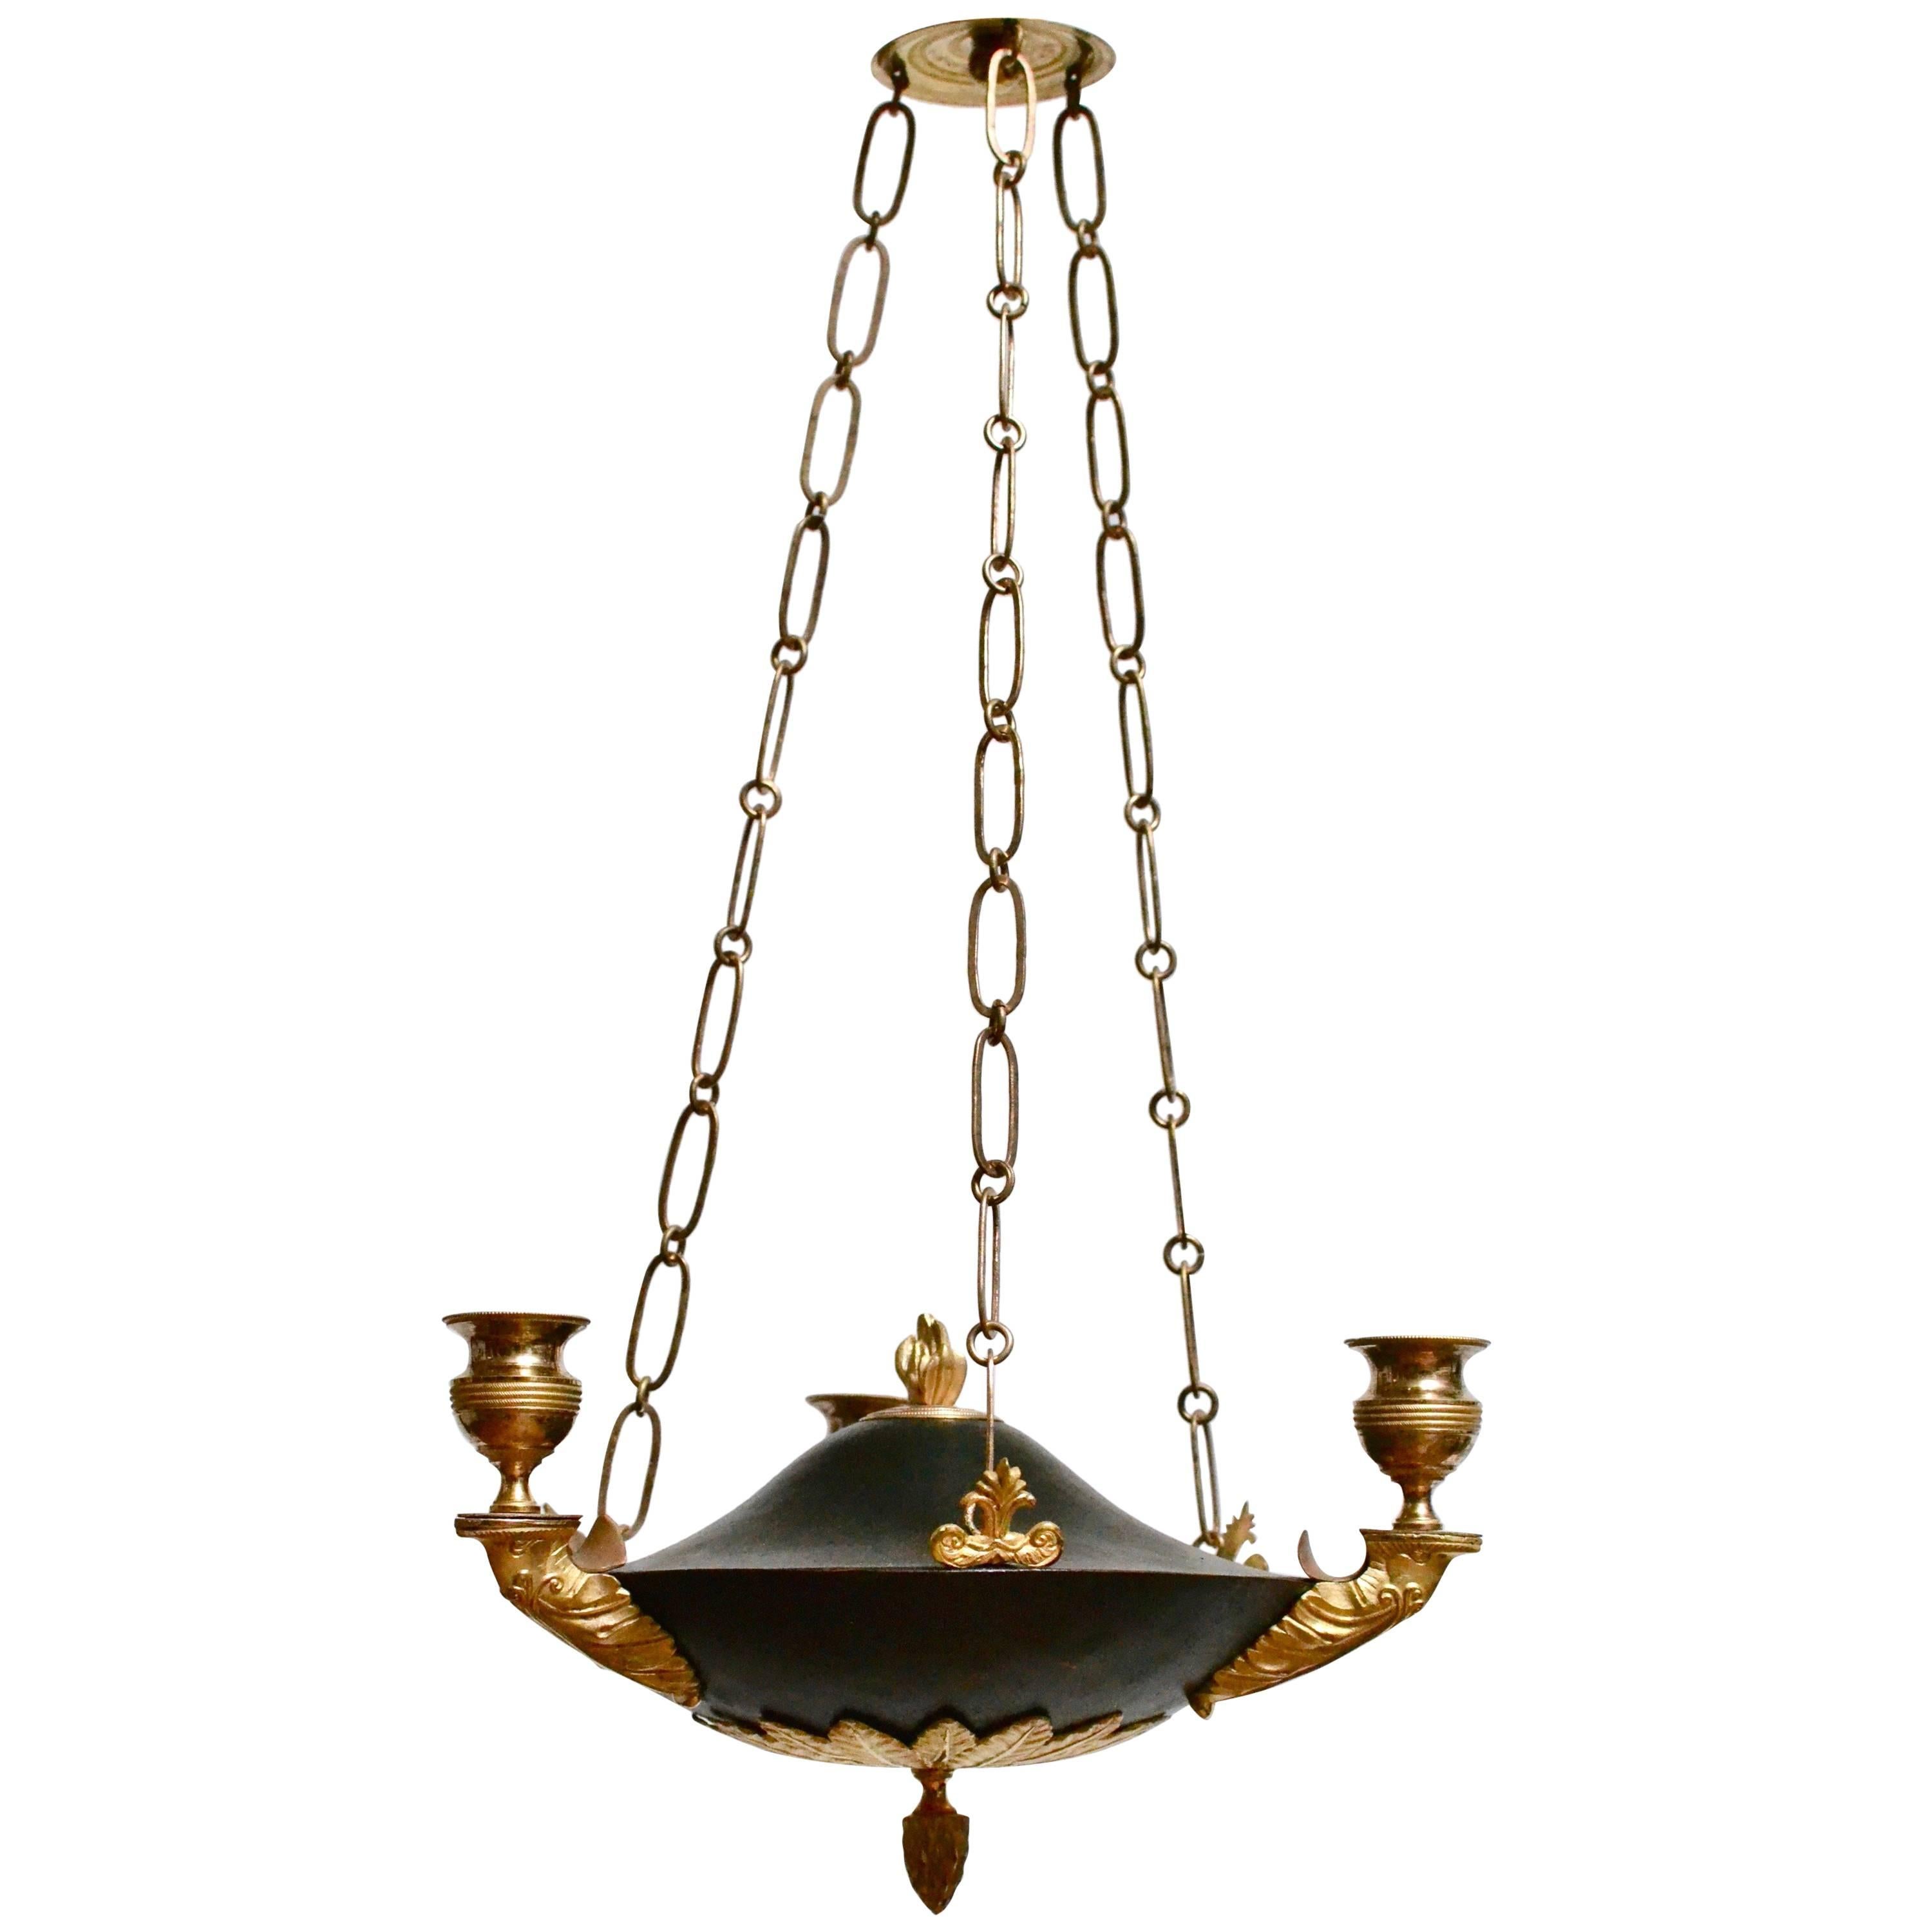 Swedish Empire Gilt and Patinated Bronze Chandelier, Early 19th century